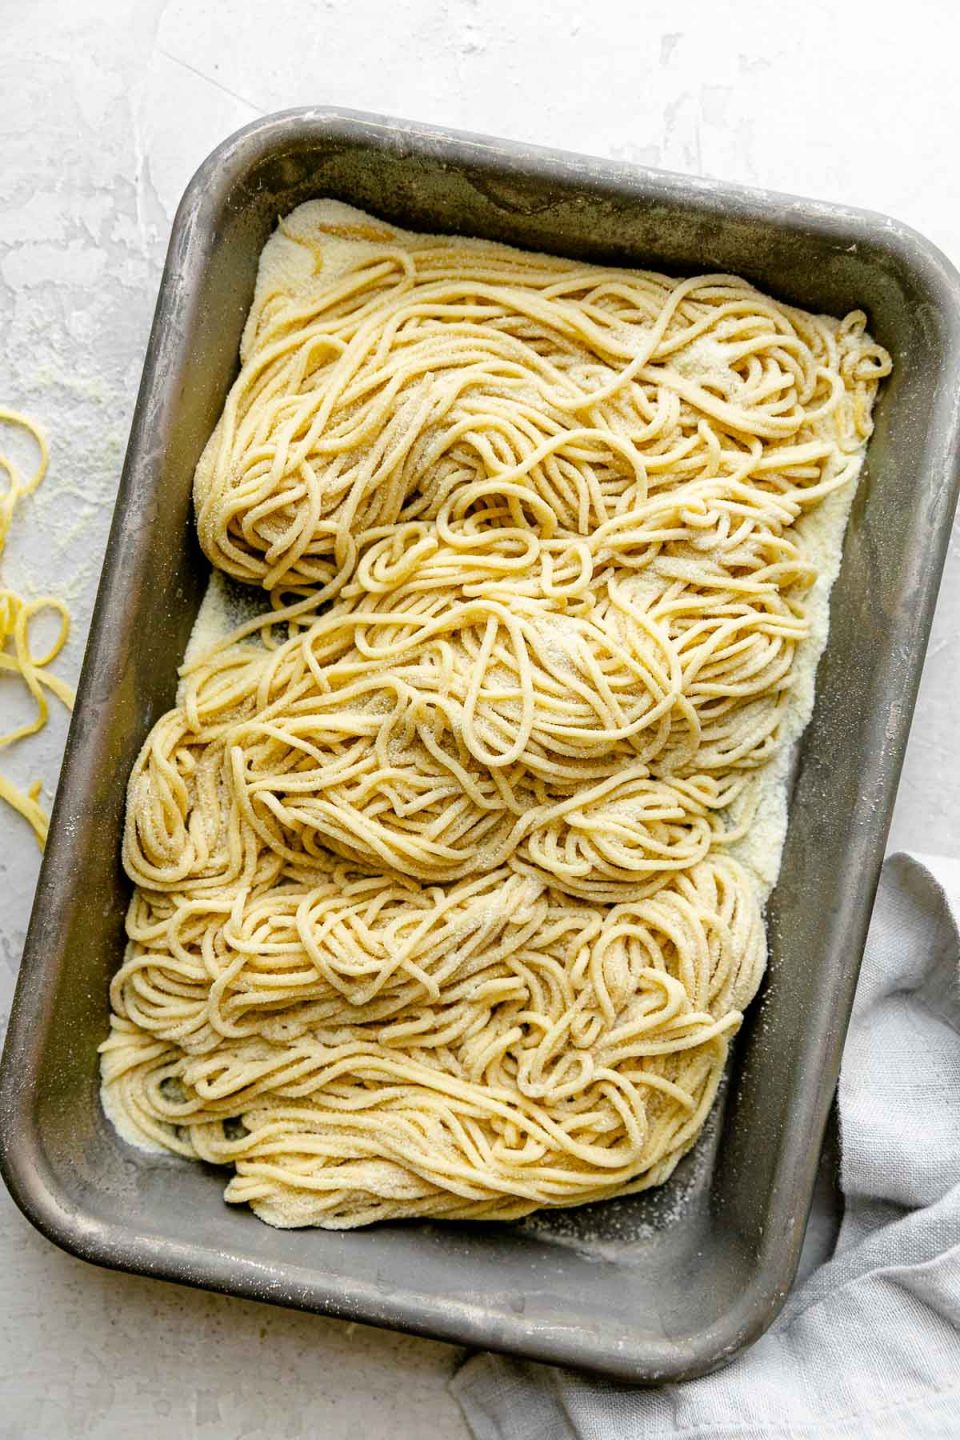 Fresh pasta cut into spaghetti noodles are arranged on a small aluminum baking sheet and dusted with semolina flour. The baking sheet sits atop a white textured surface. A light blue napkin & a few stray noodles surround the baking sheet.